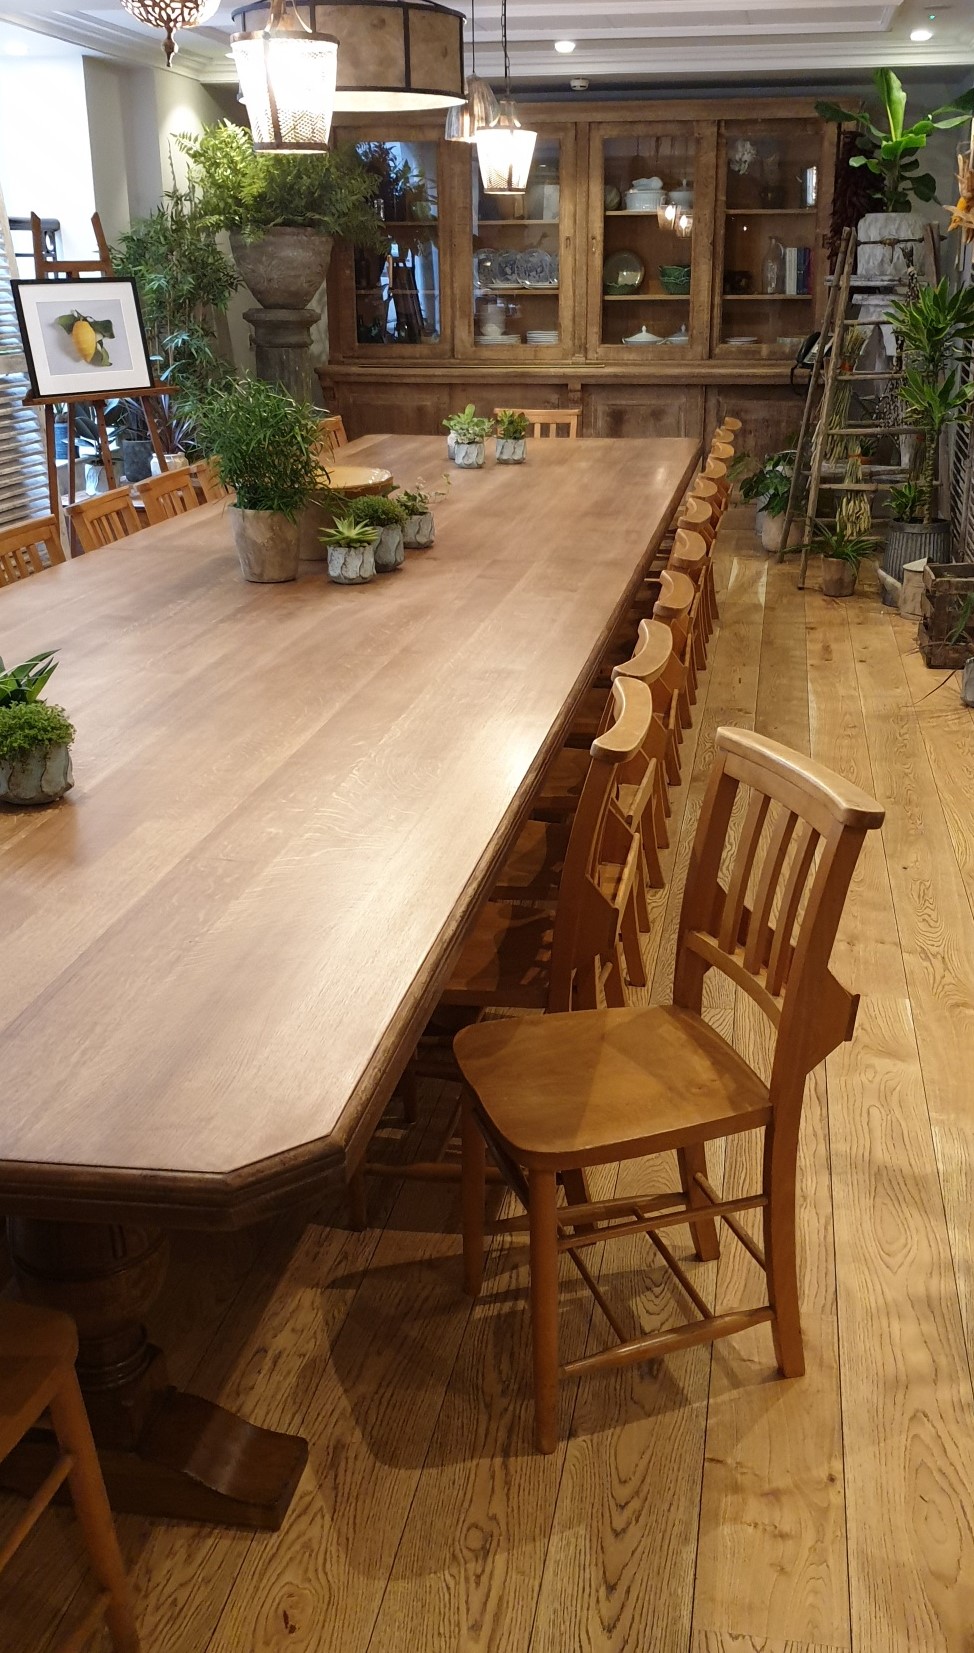 Victorian Church chairs used around kitchen or dining room tables. Buy old wooden Antique Church chairs from UKAA. Old Chapel chairs are ideal for traditional homes